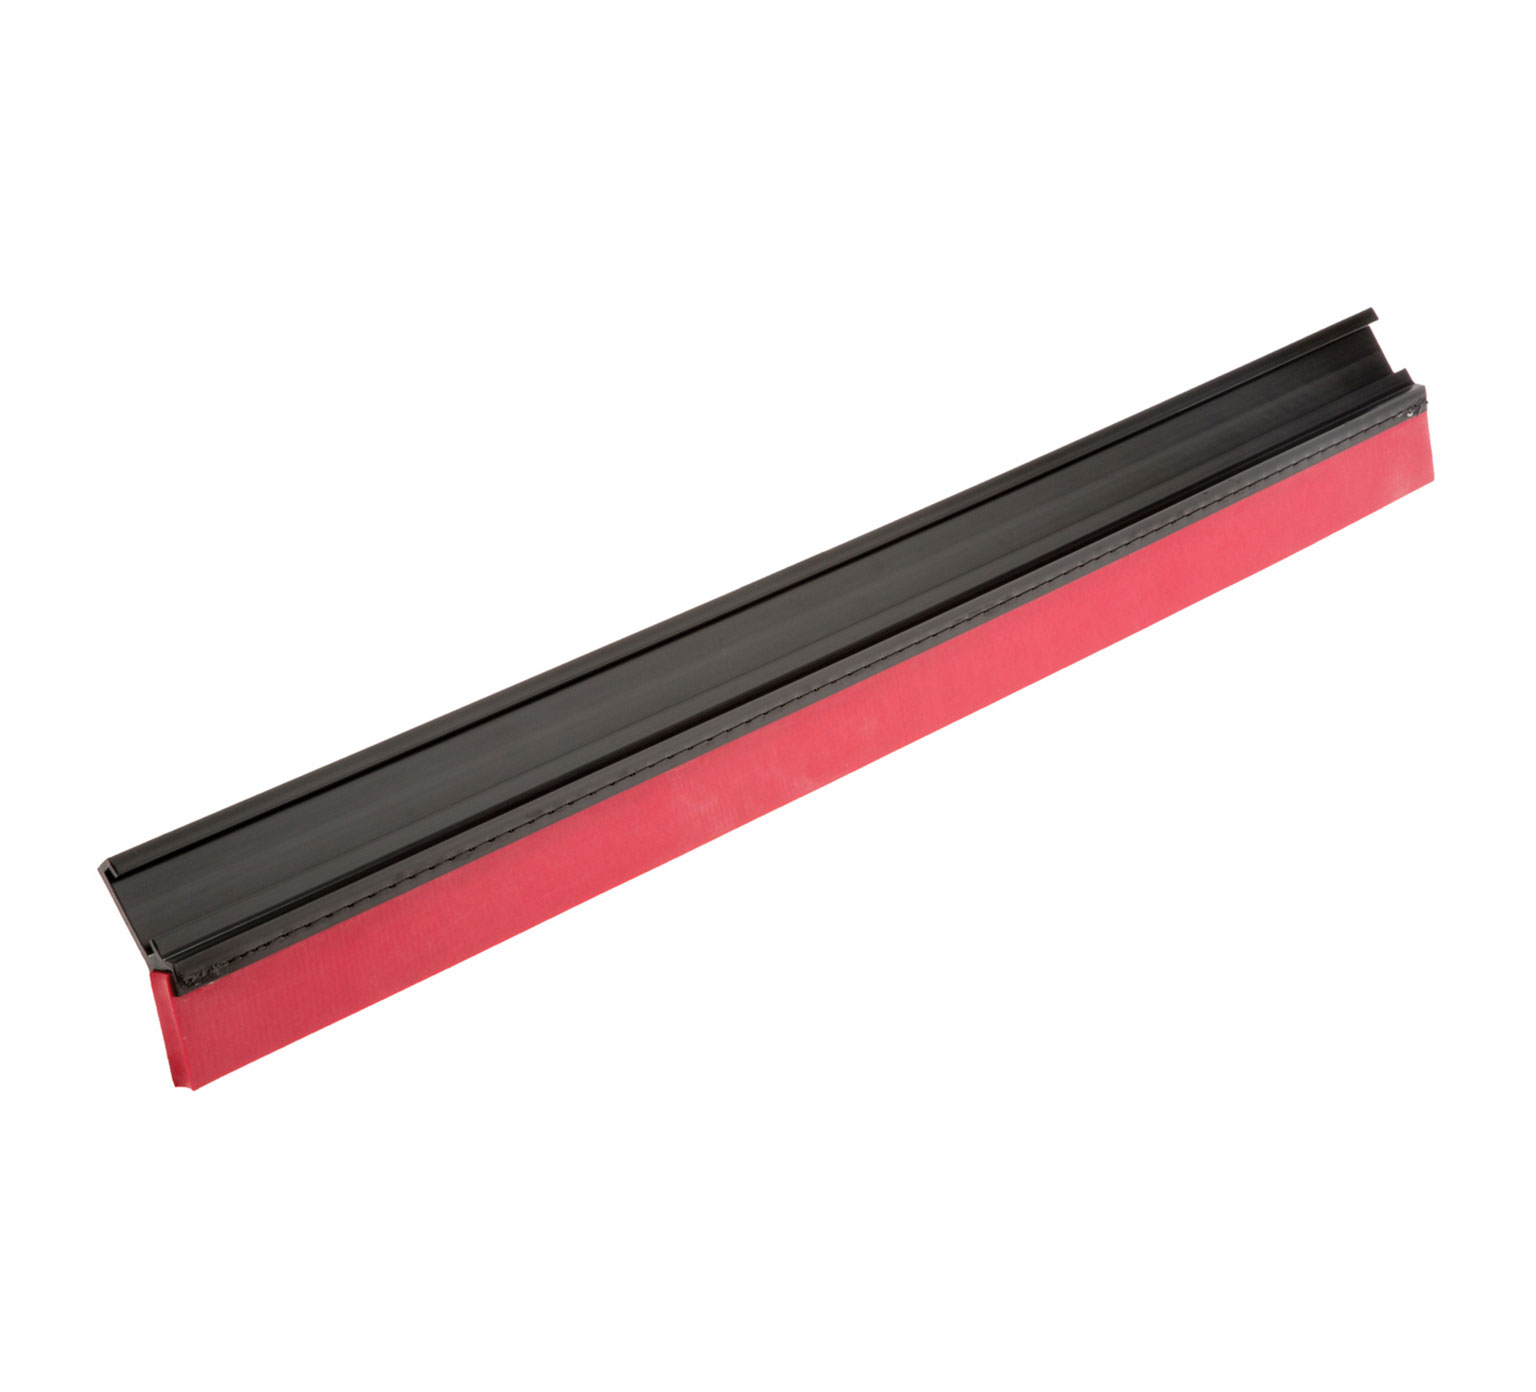 386260 Linatex Side Squeegee &#8211; 28.6 in alt 1